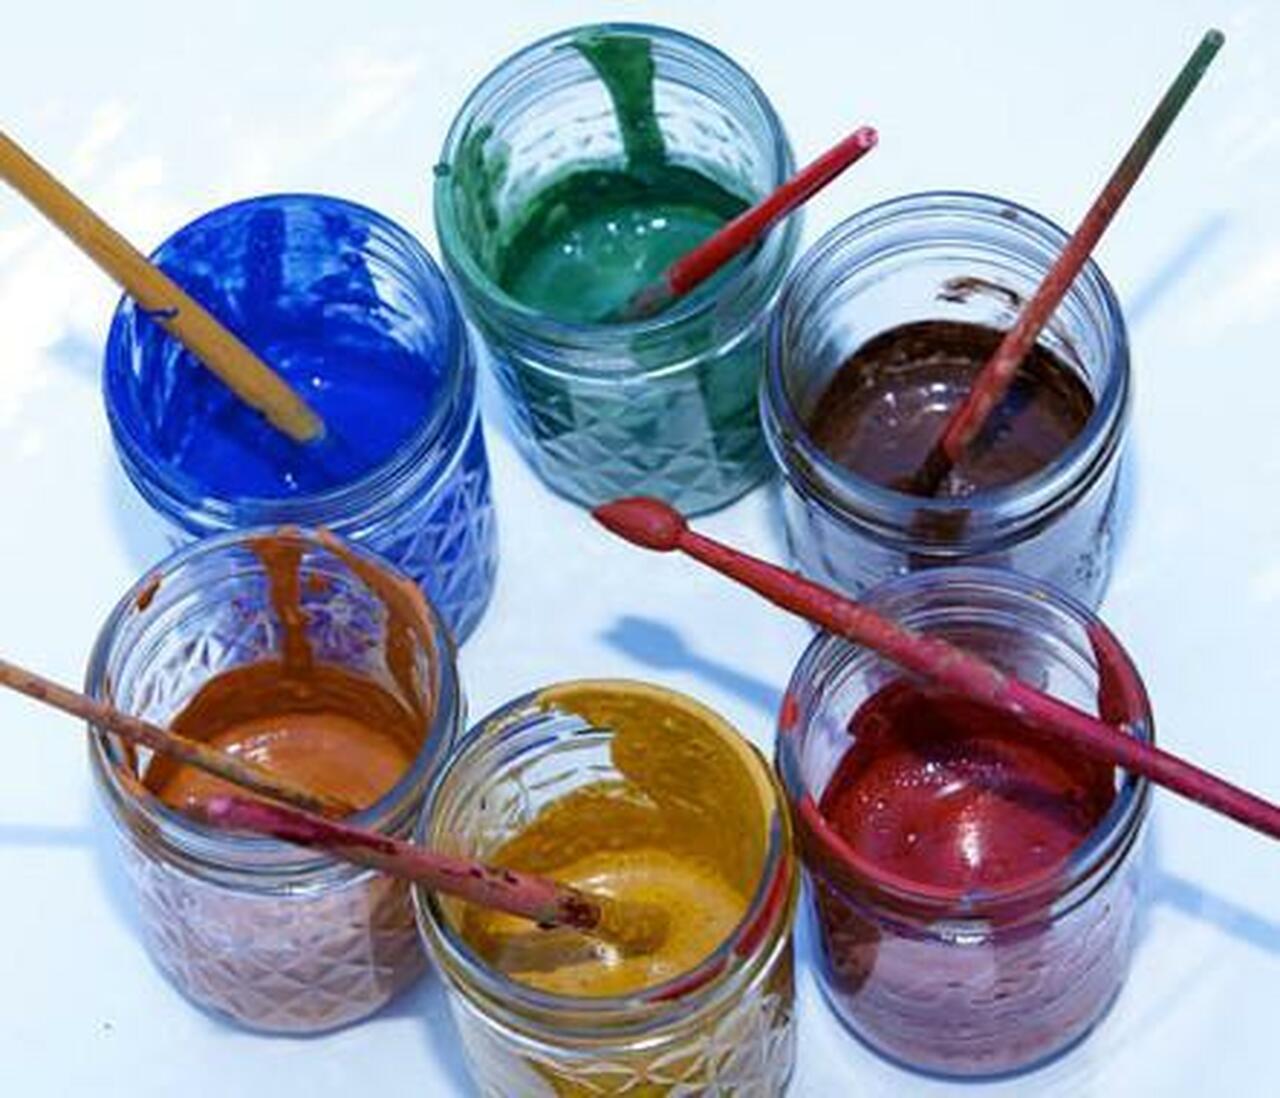 Natural Earth Paint | Children's Earth Paint Kit Make and Wonder 